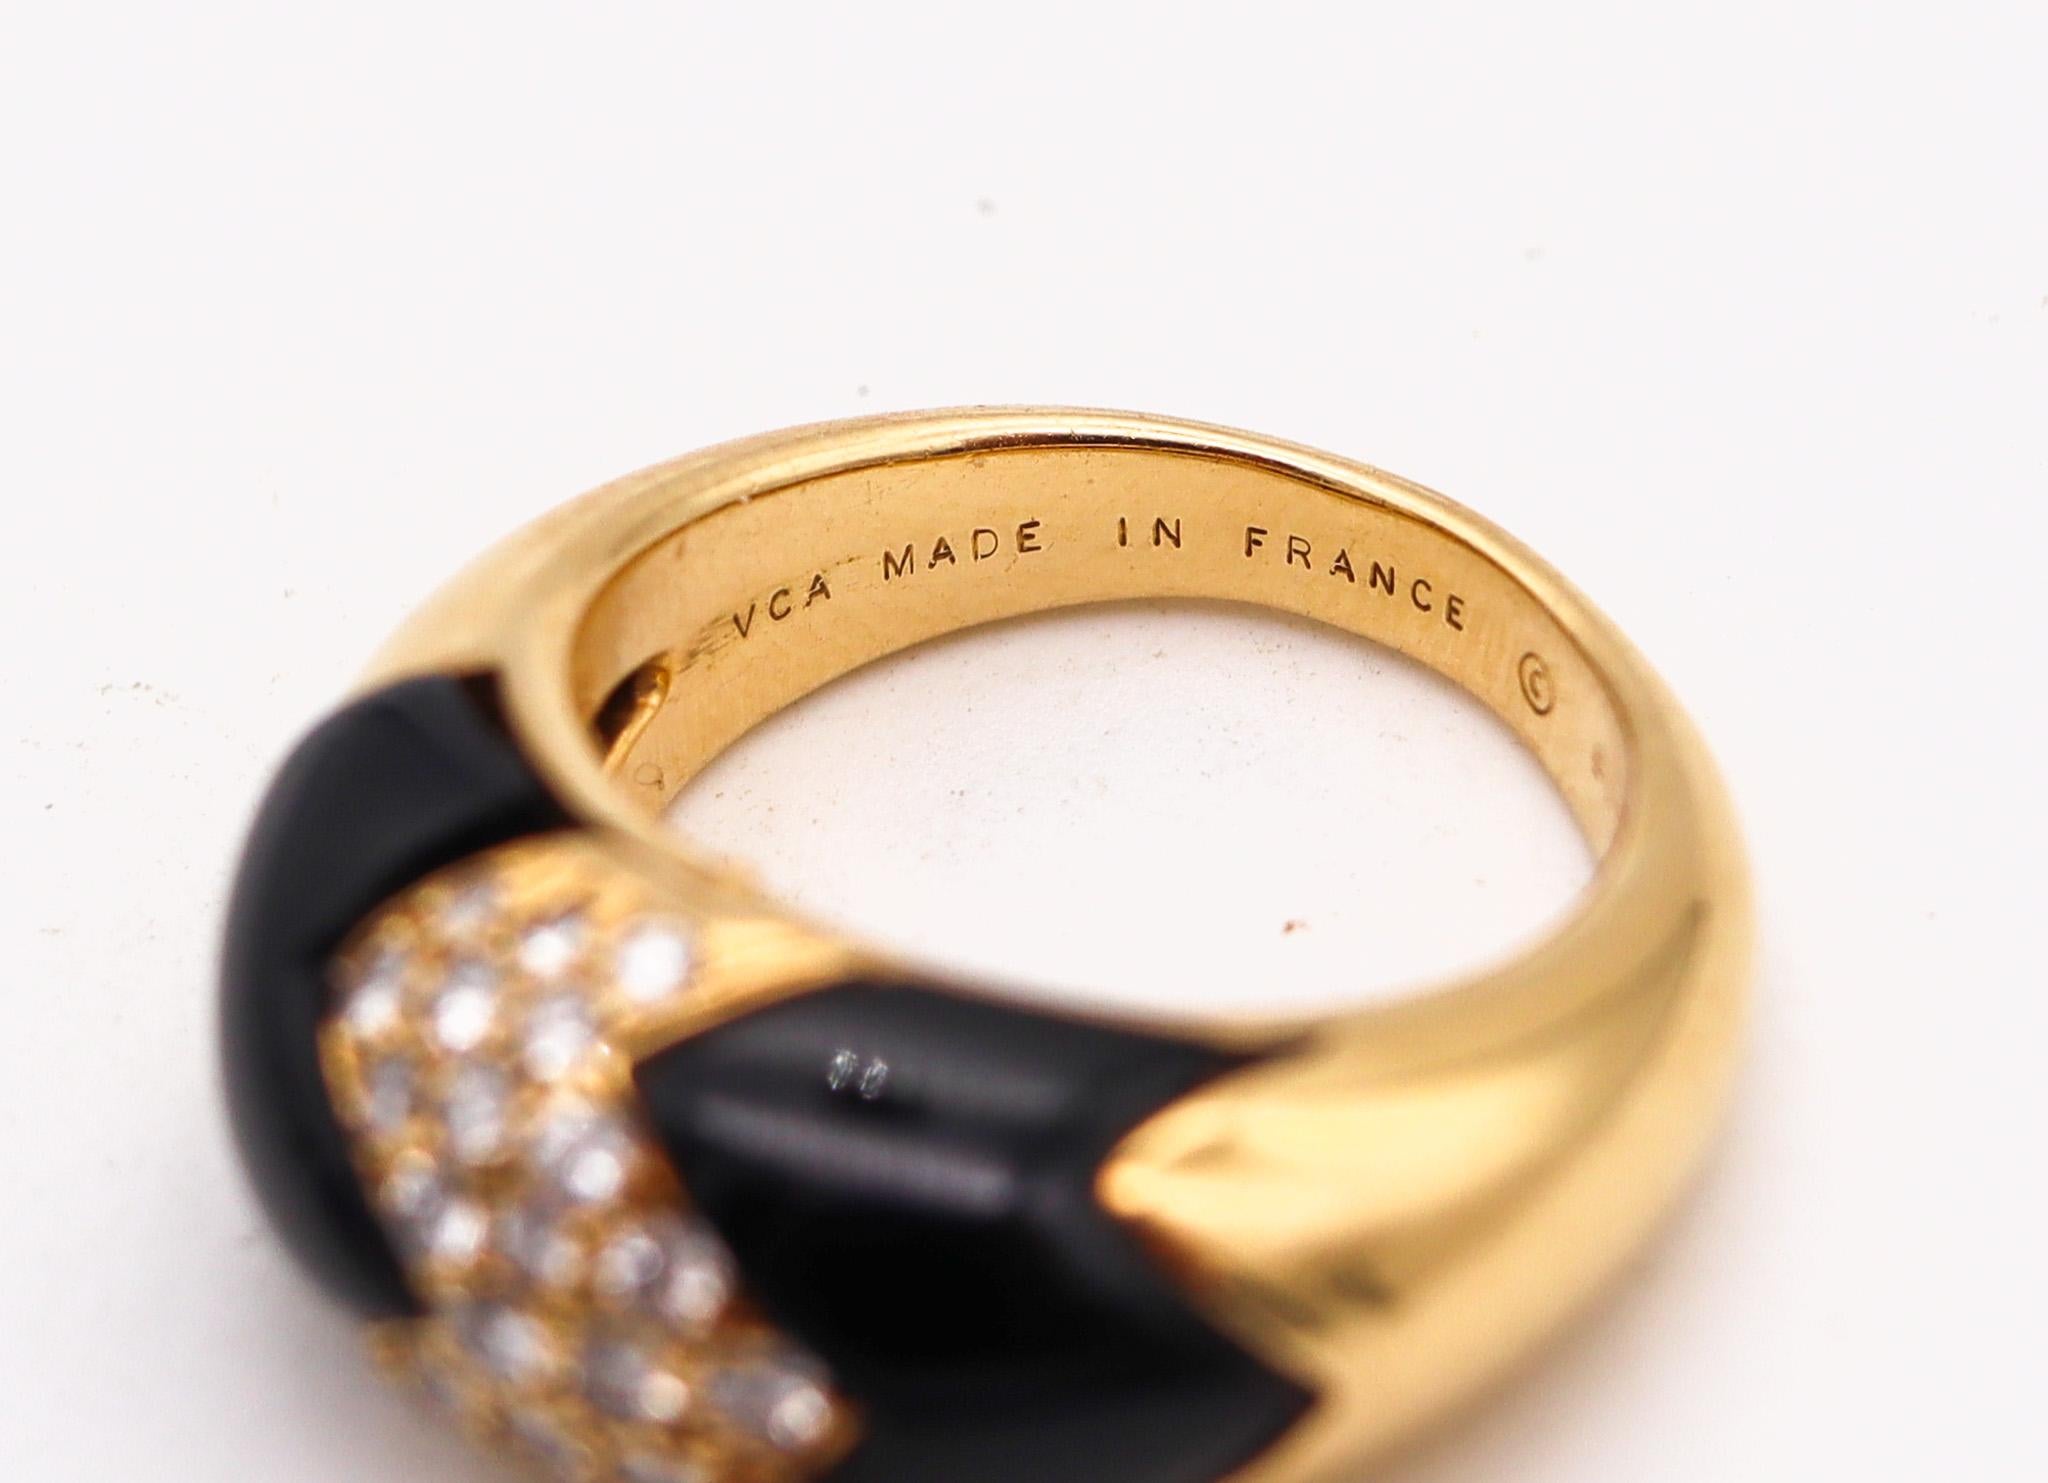 Modernist Van Cleef & Arpels 1970 Geometric Ring In 18Kt Gold With Diamonds And Black Onyx For Sale